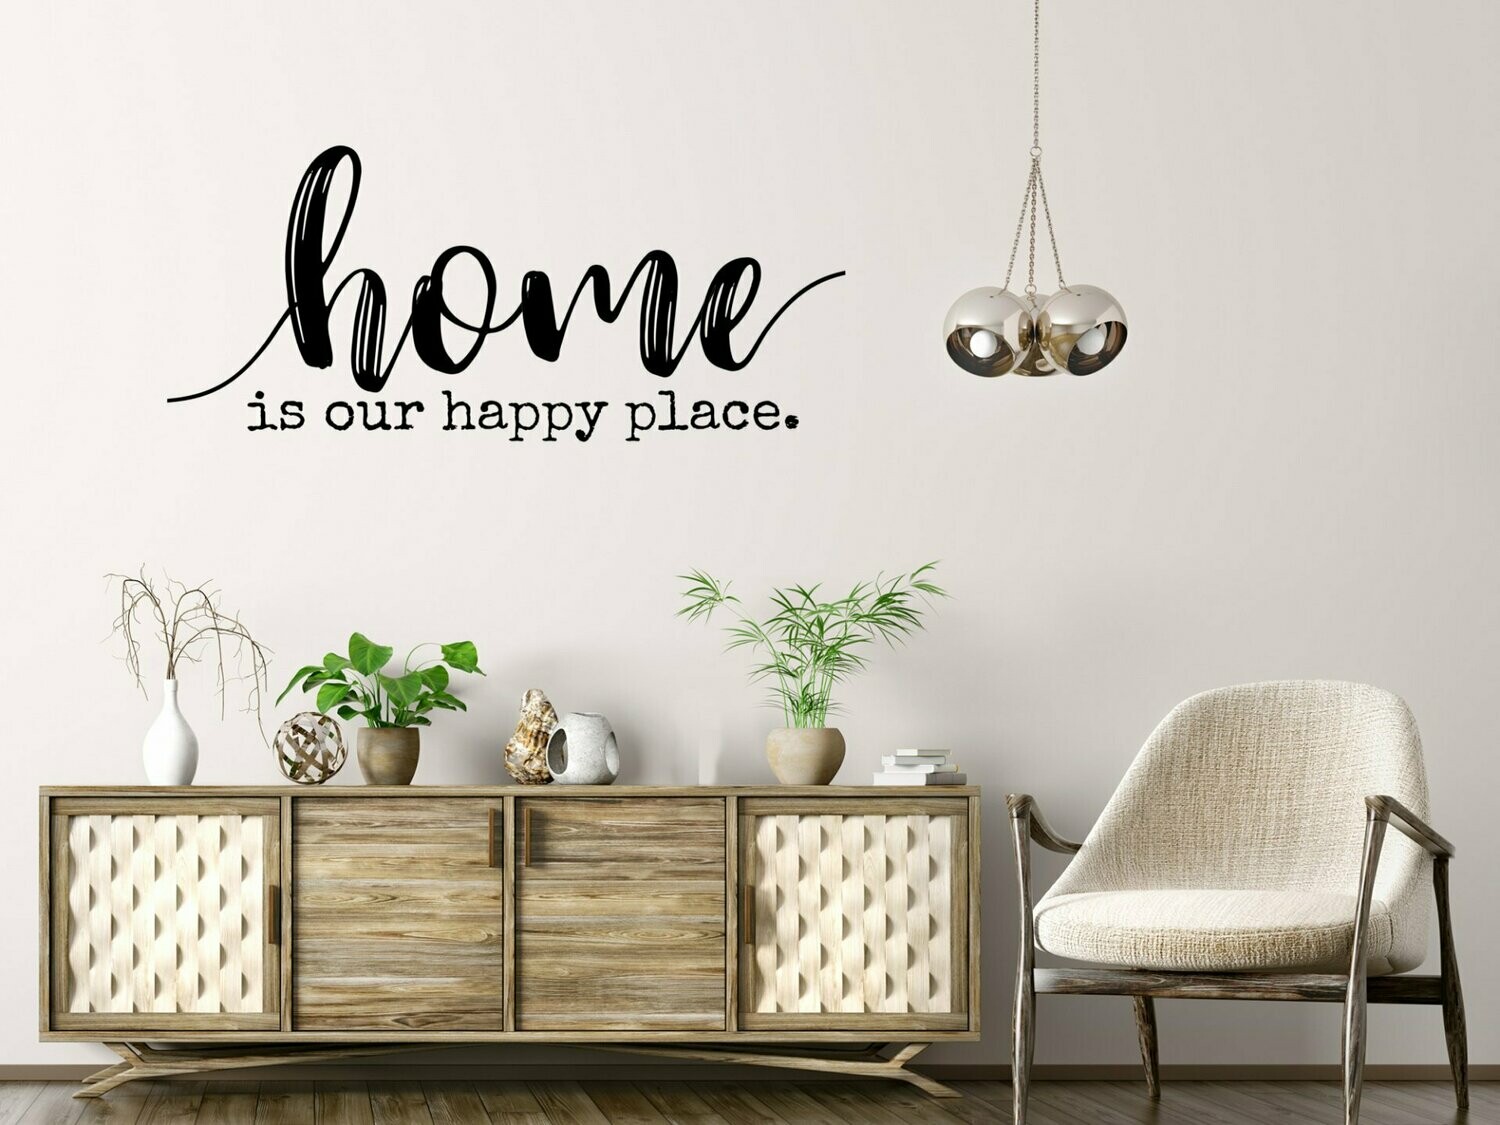 This Is Our Happy Place Vinyl Wall Decal Sticker 